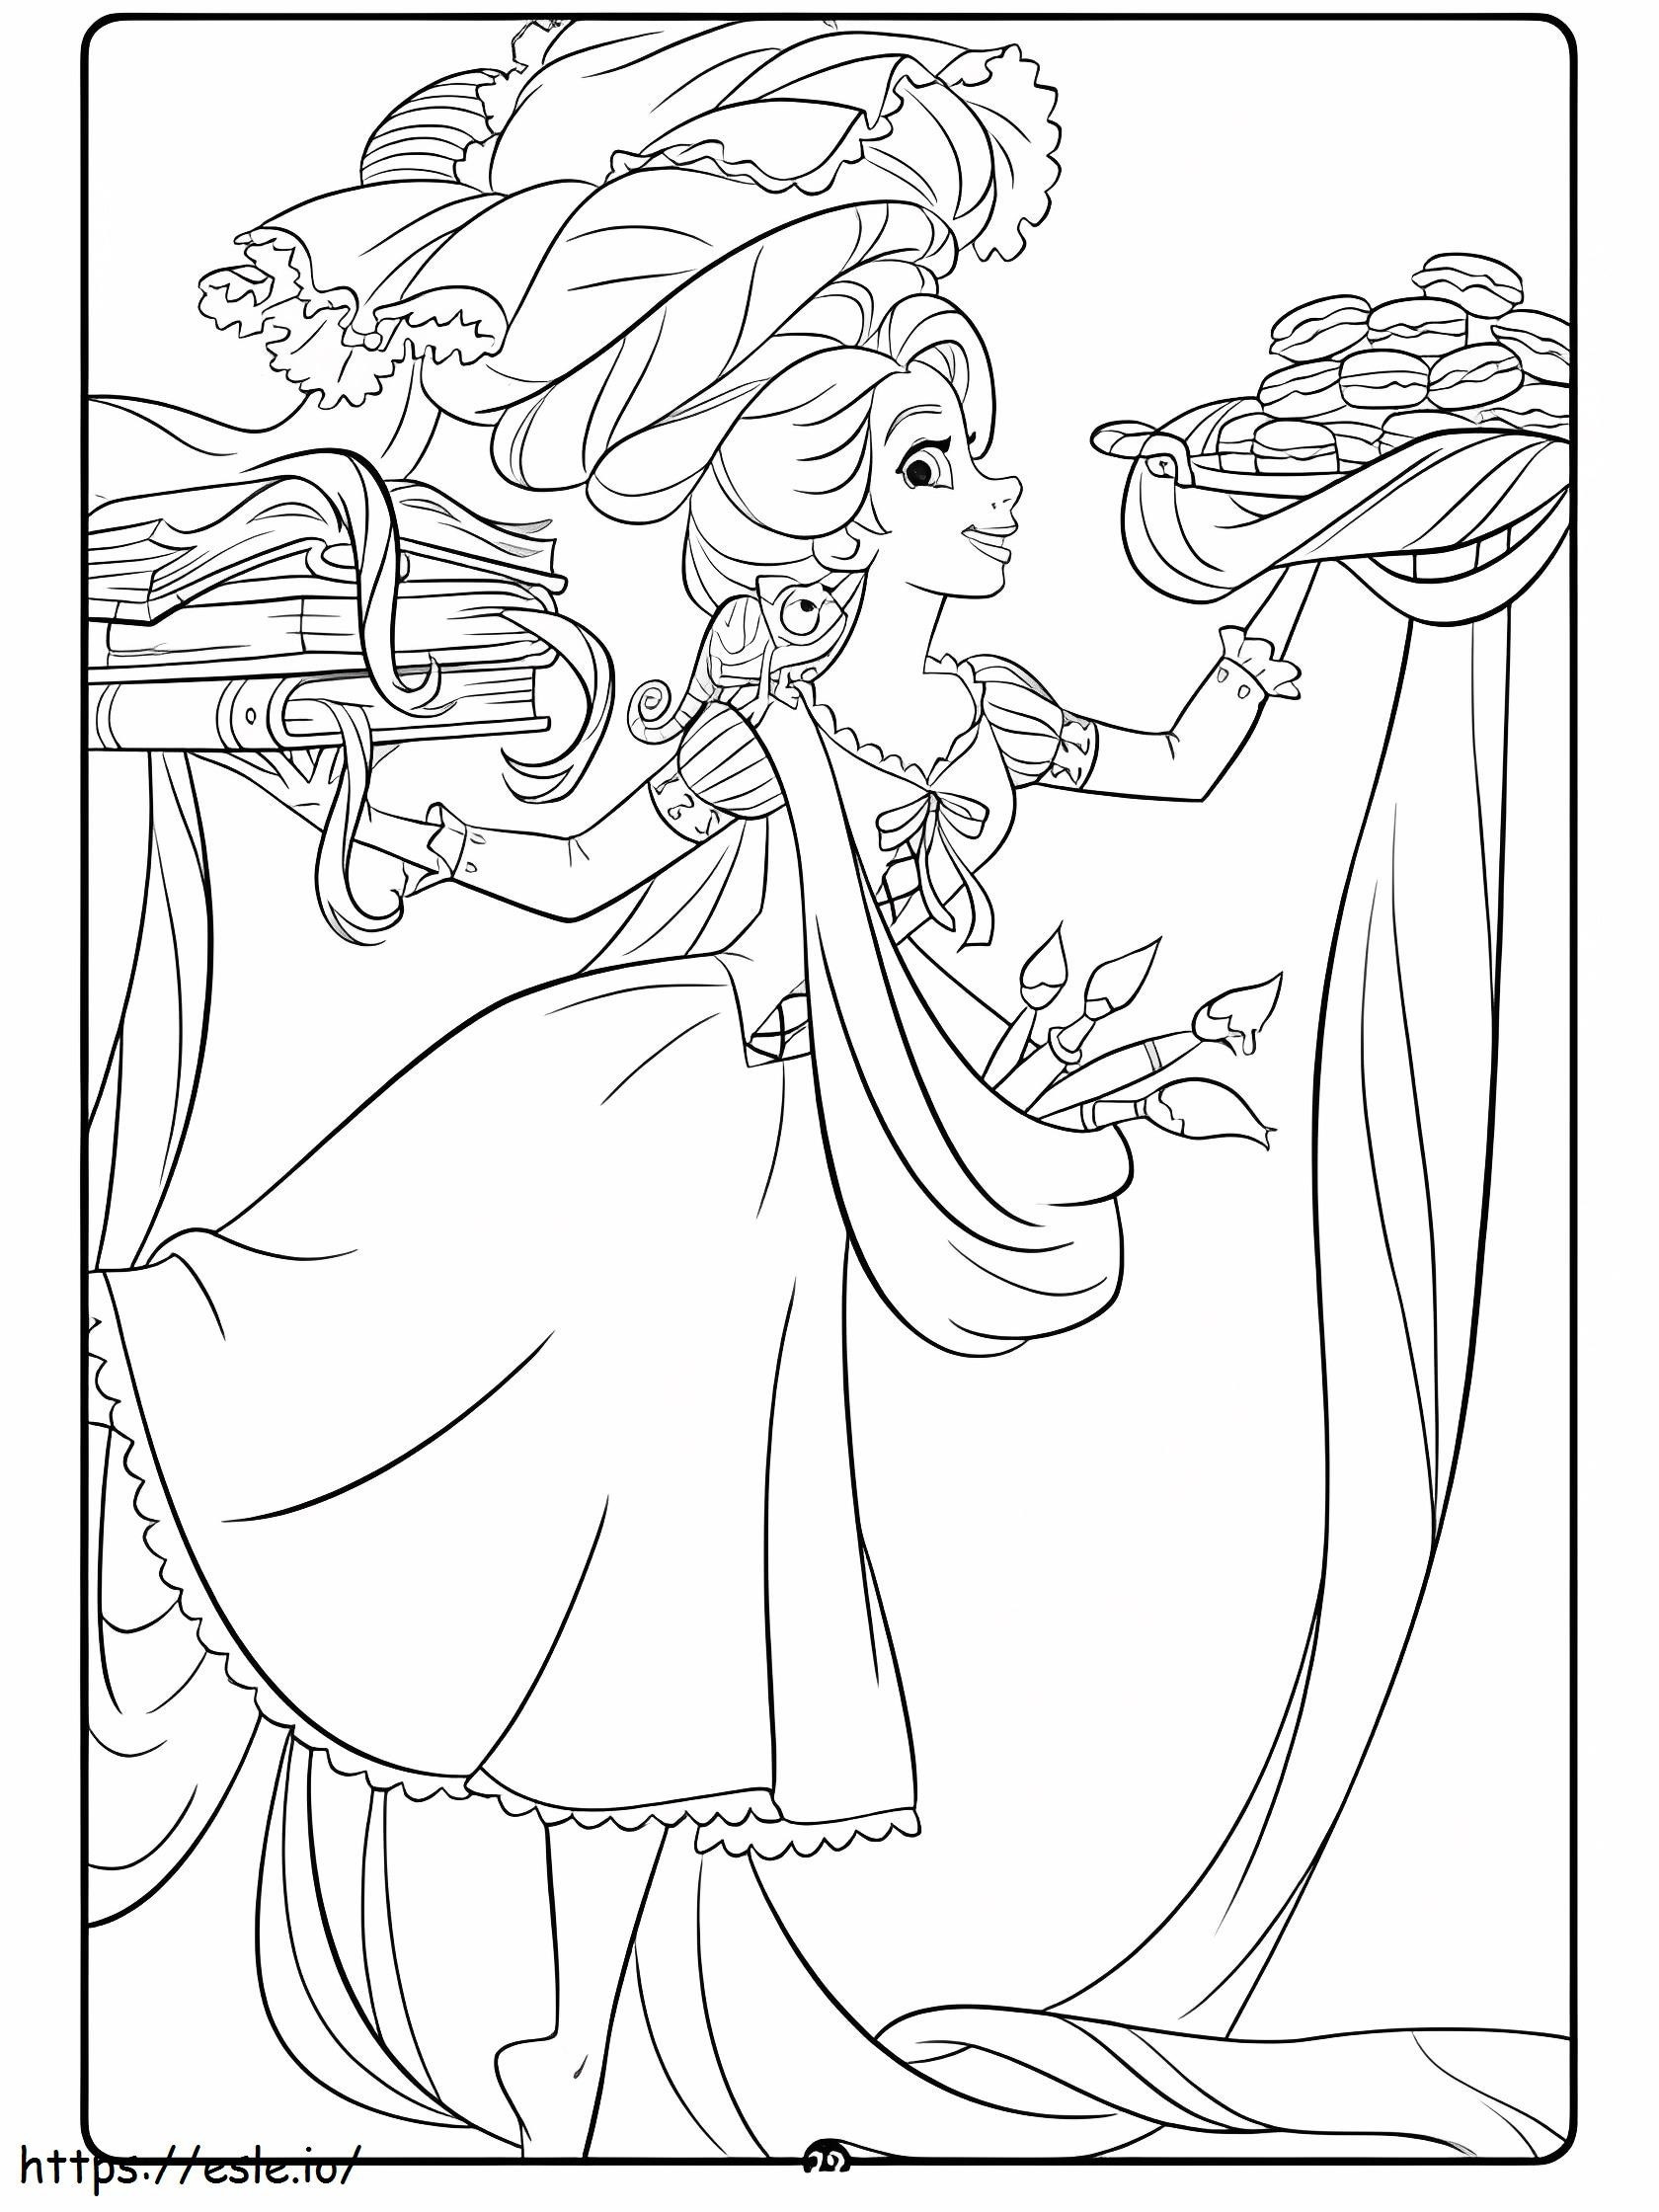 Rapunzel Holding Food And Books coloring page